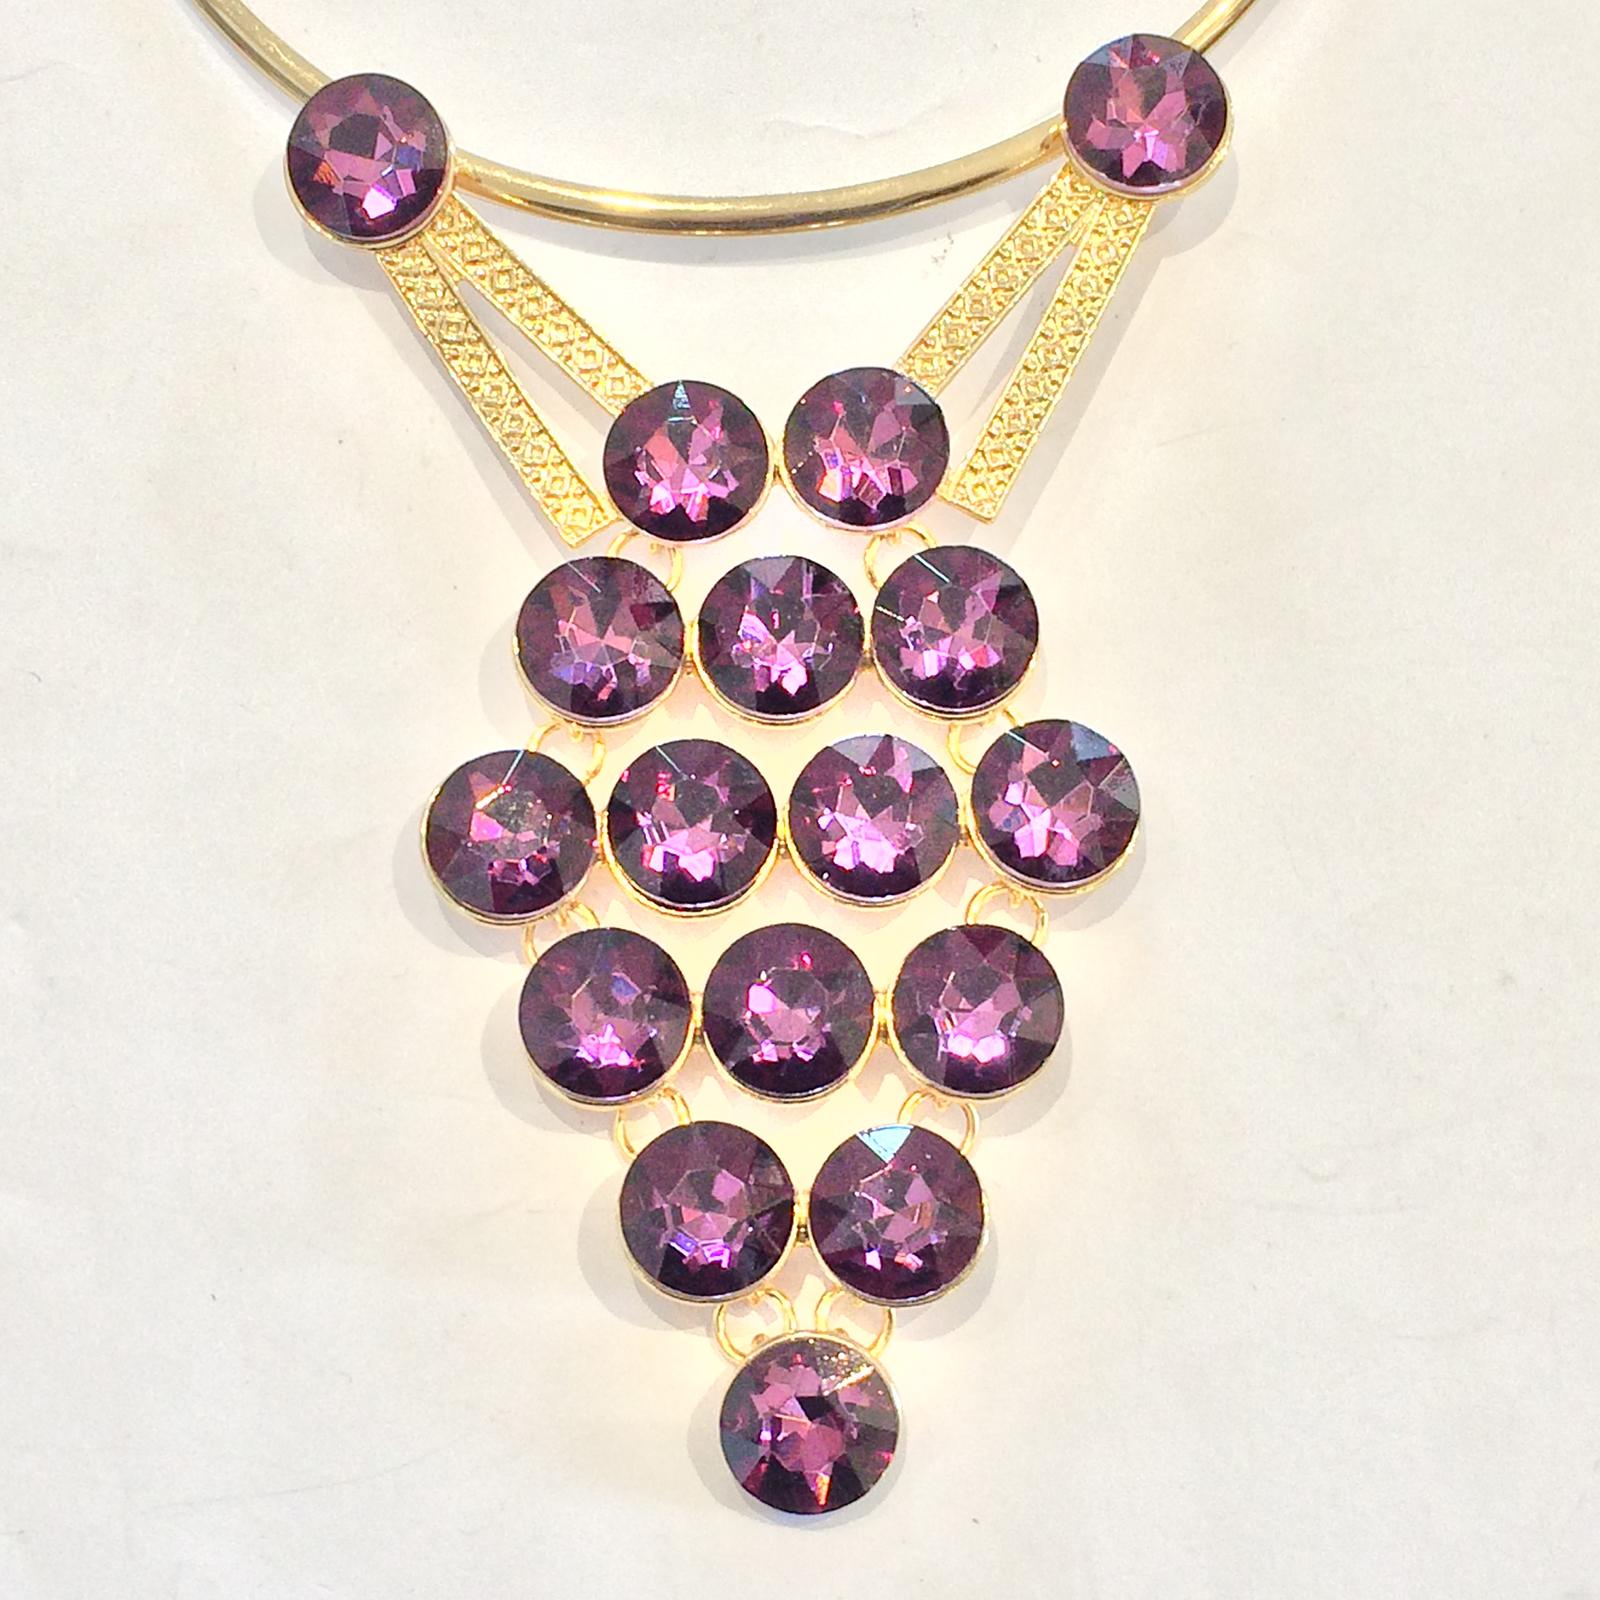 Oscar De La Renta Necklace “Grapes”, Faceted Amethyst Glass set to Patinated Gilt, with a smooth Gilt Collar, adjustable gilt chain and original Lobster Claw clasp. All in perfect condition with no flaws or damage whatsoever. An outstanding Design,